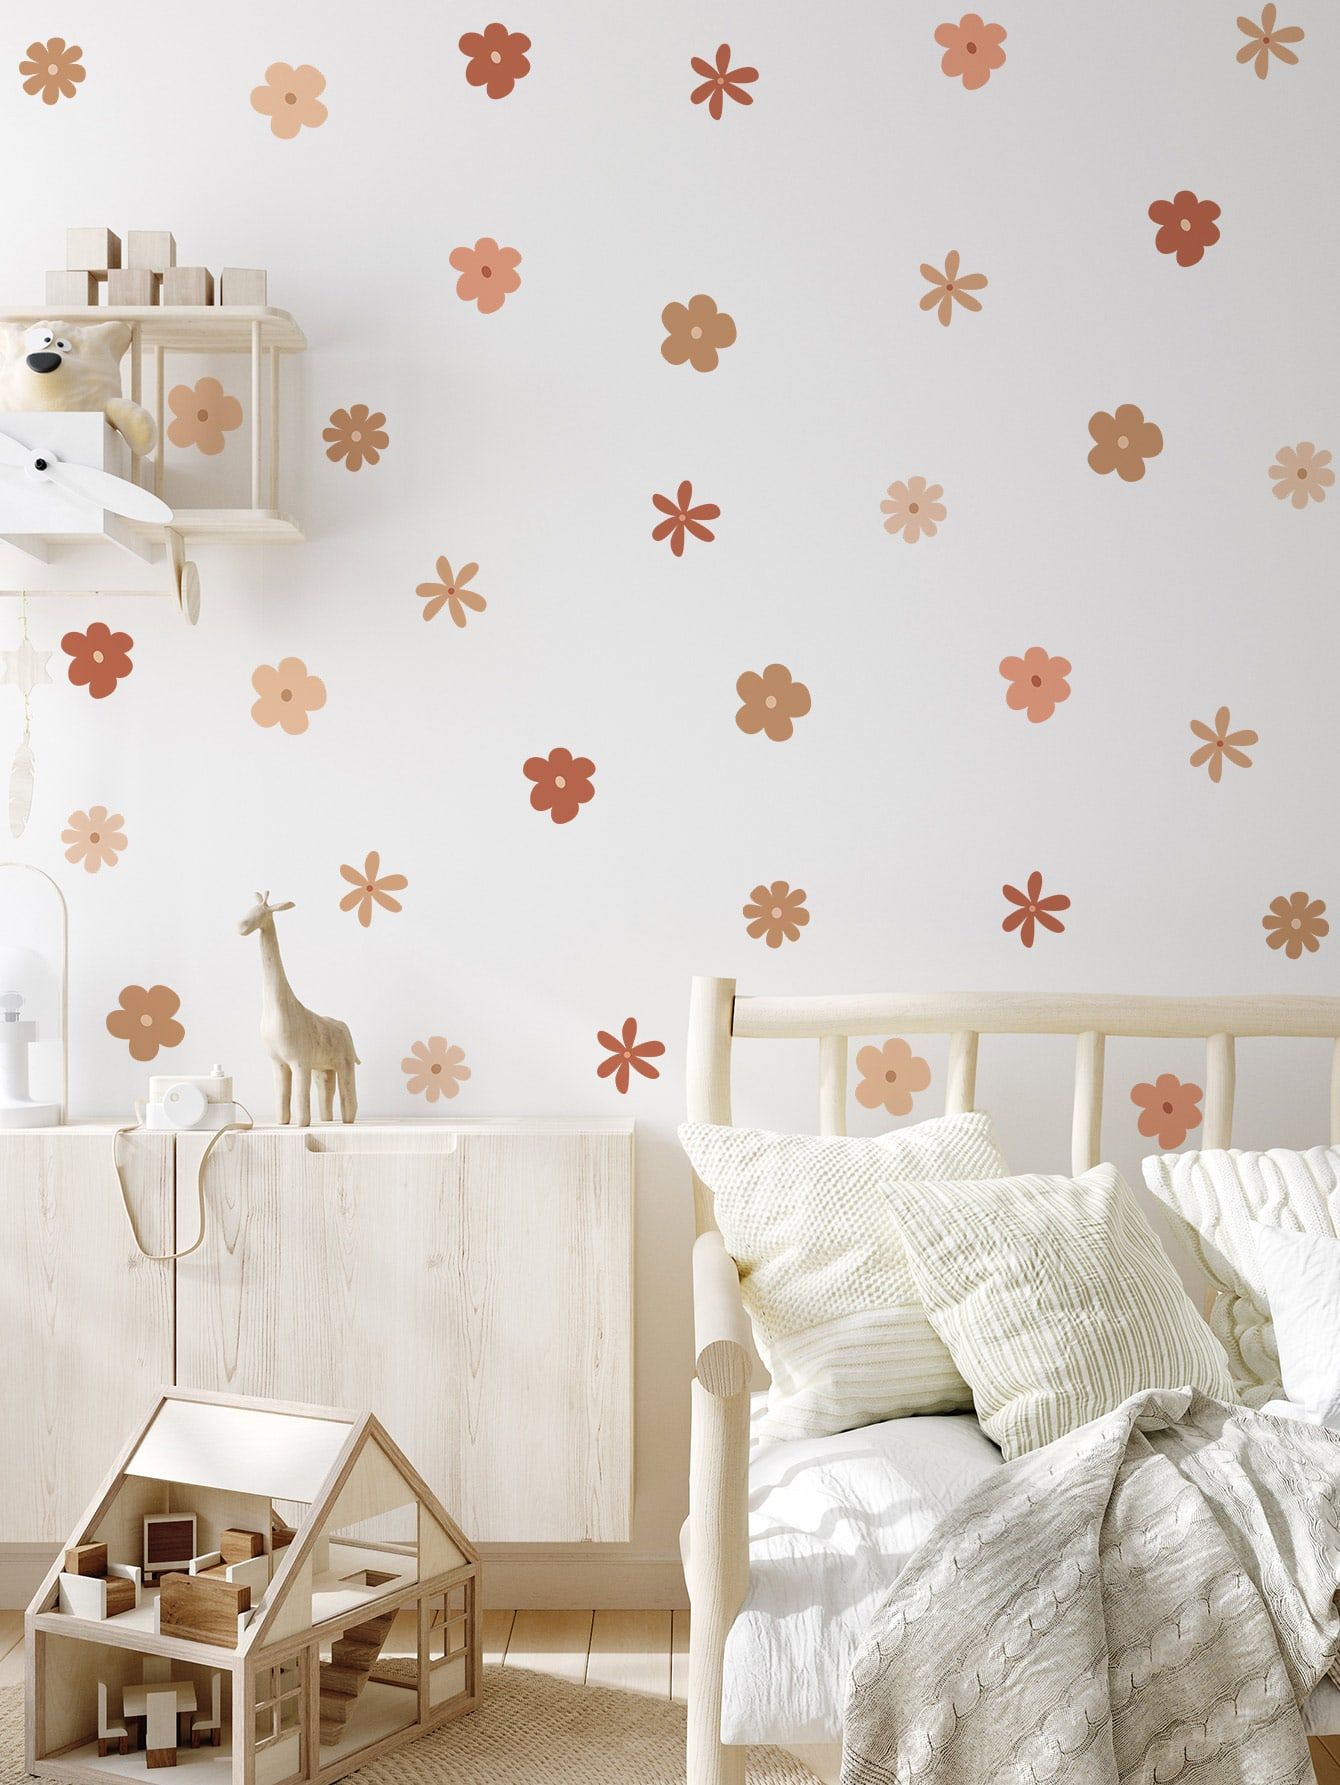 The Charm of Baby Nursery Wall Stickers: A Whimsical Touch for Your Little One’s Room